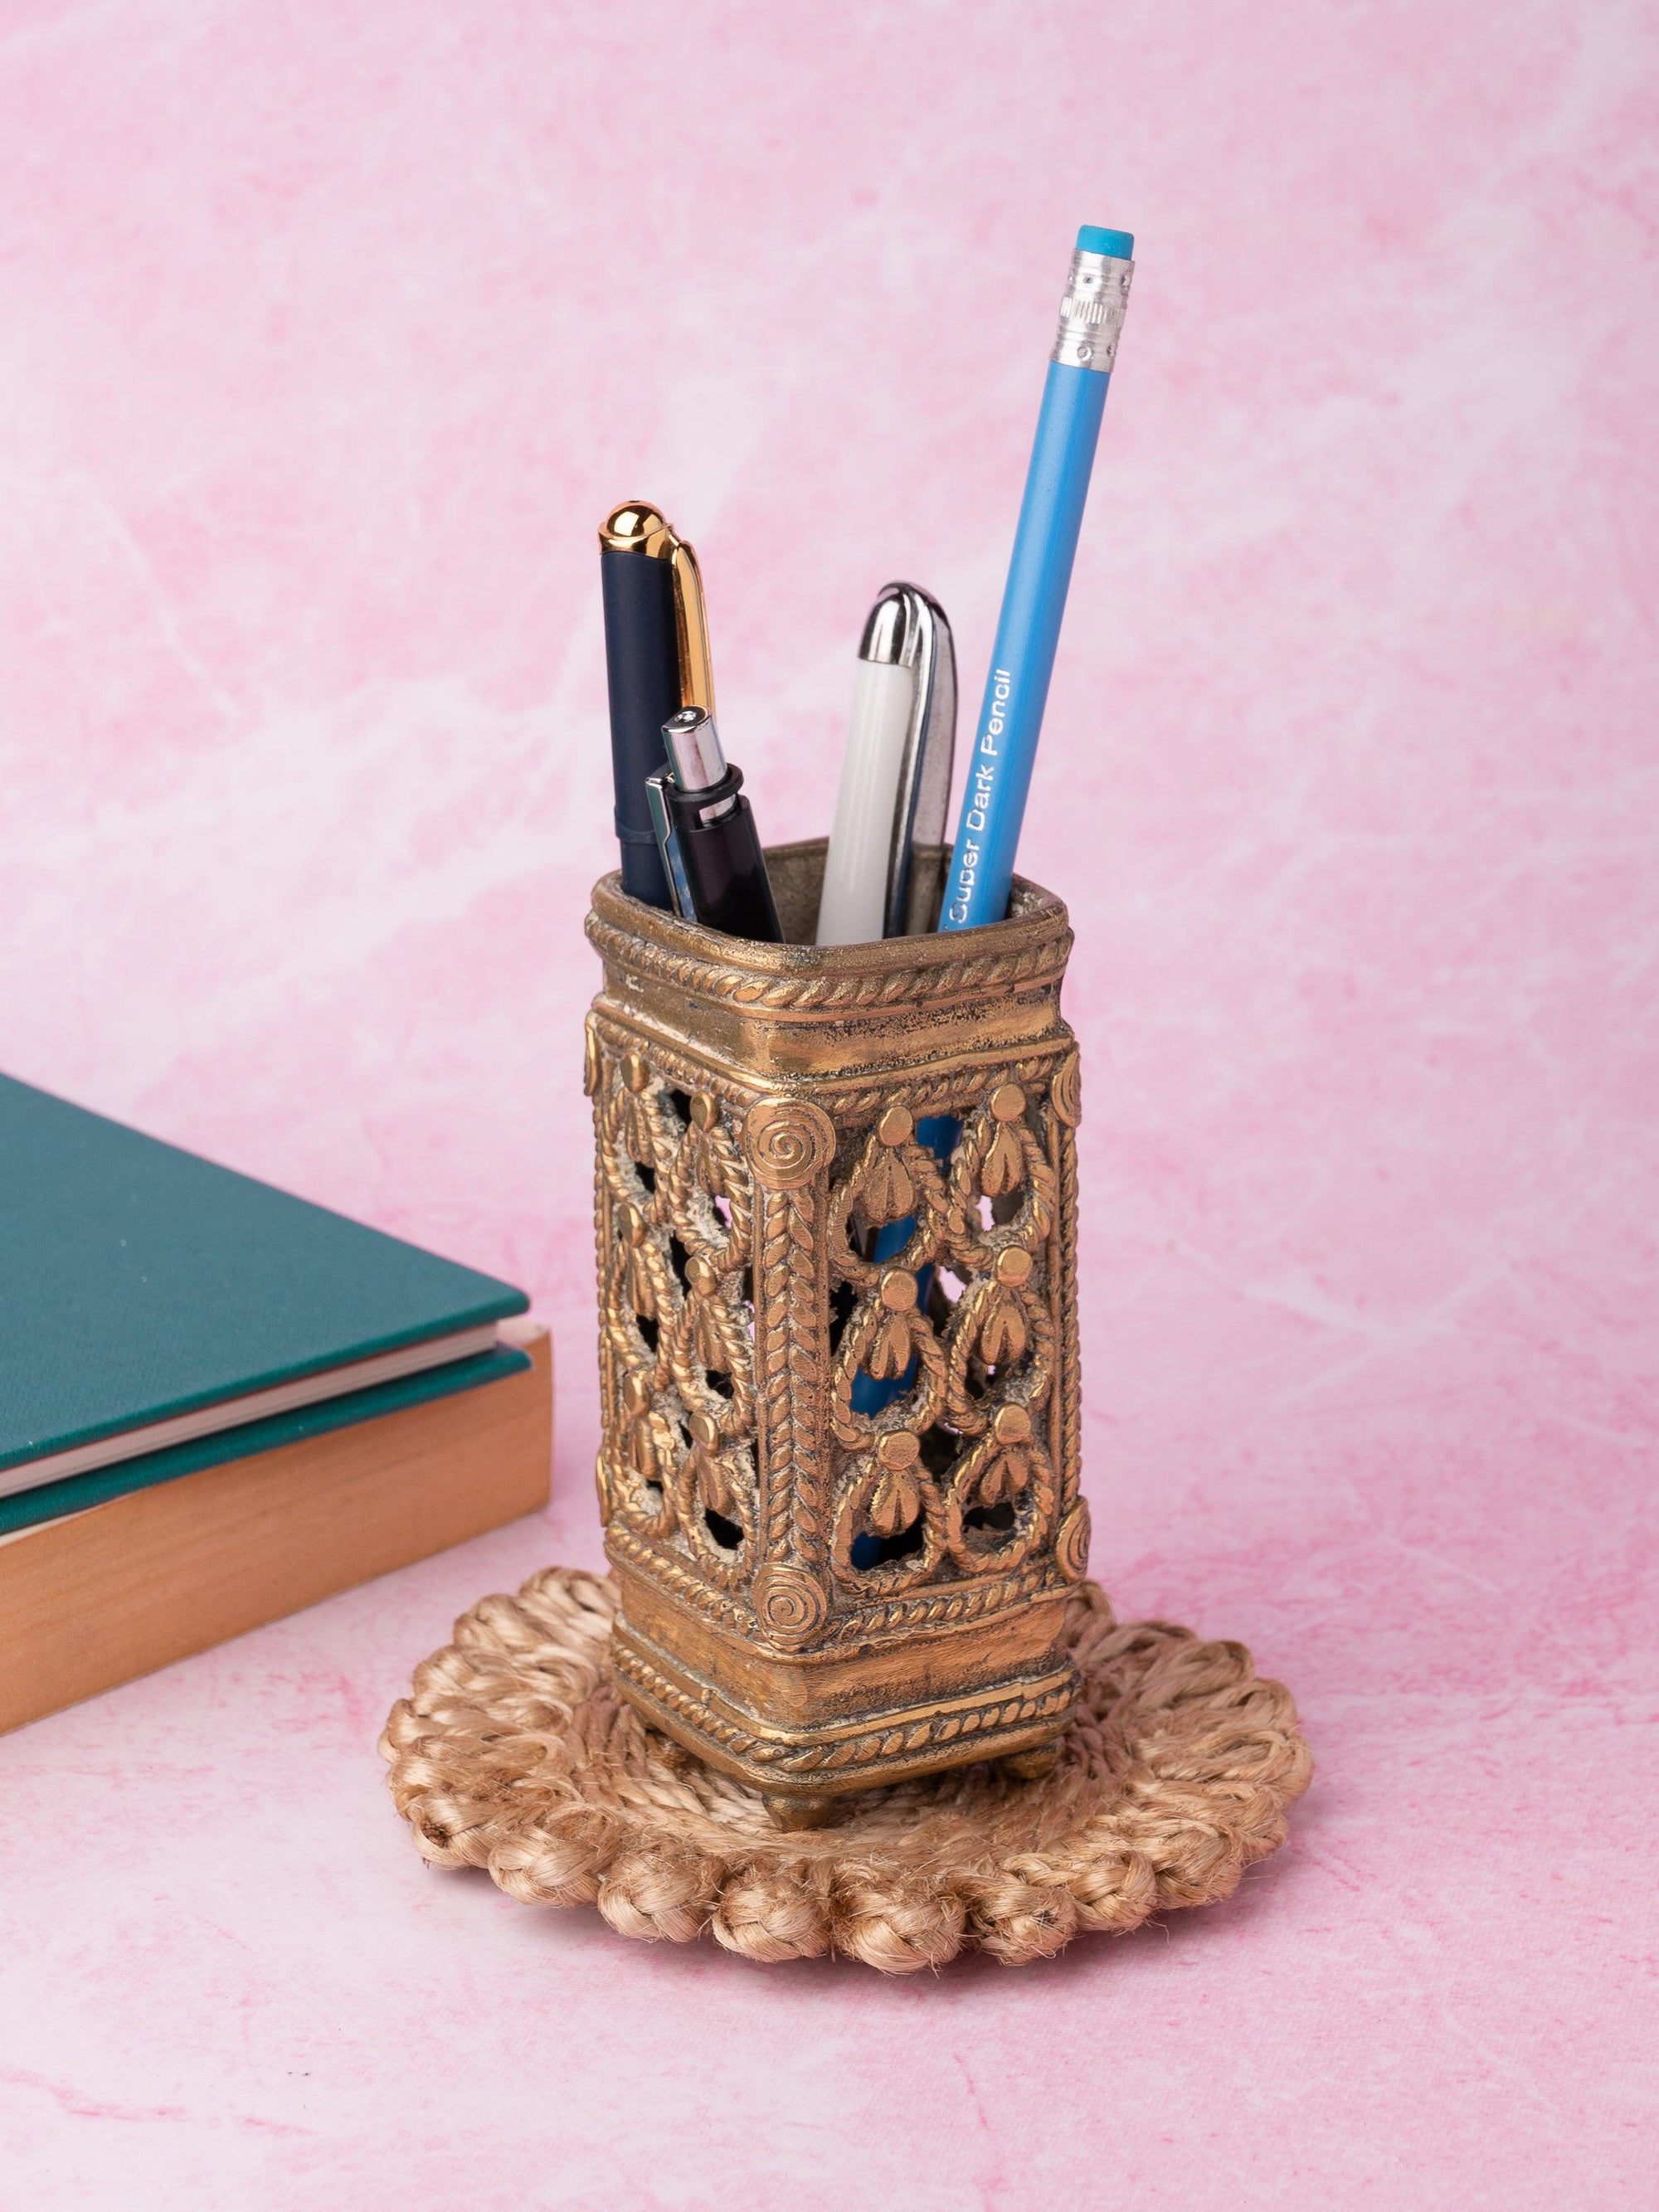 Dokra Art Square Shaped Pen / Pencil Stand, Desk Accessory - 4 inches height - The Heritage Artifacts